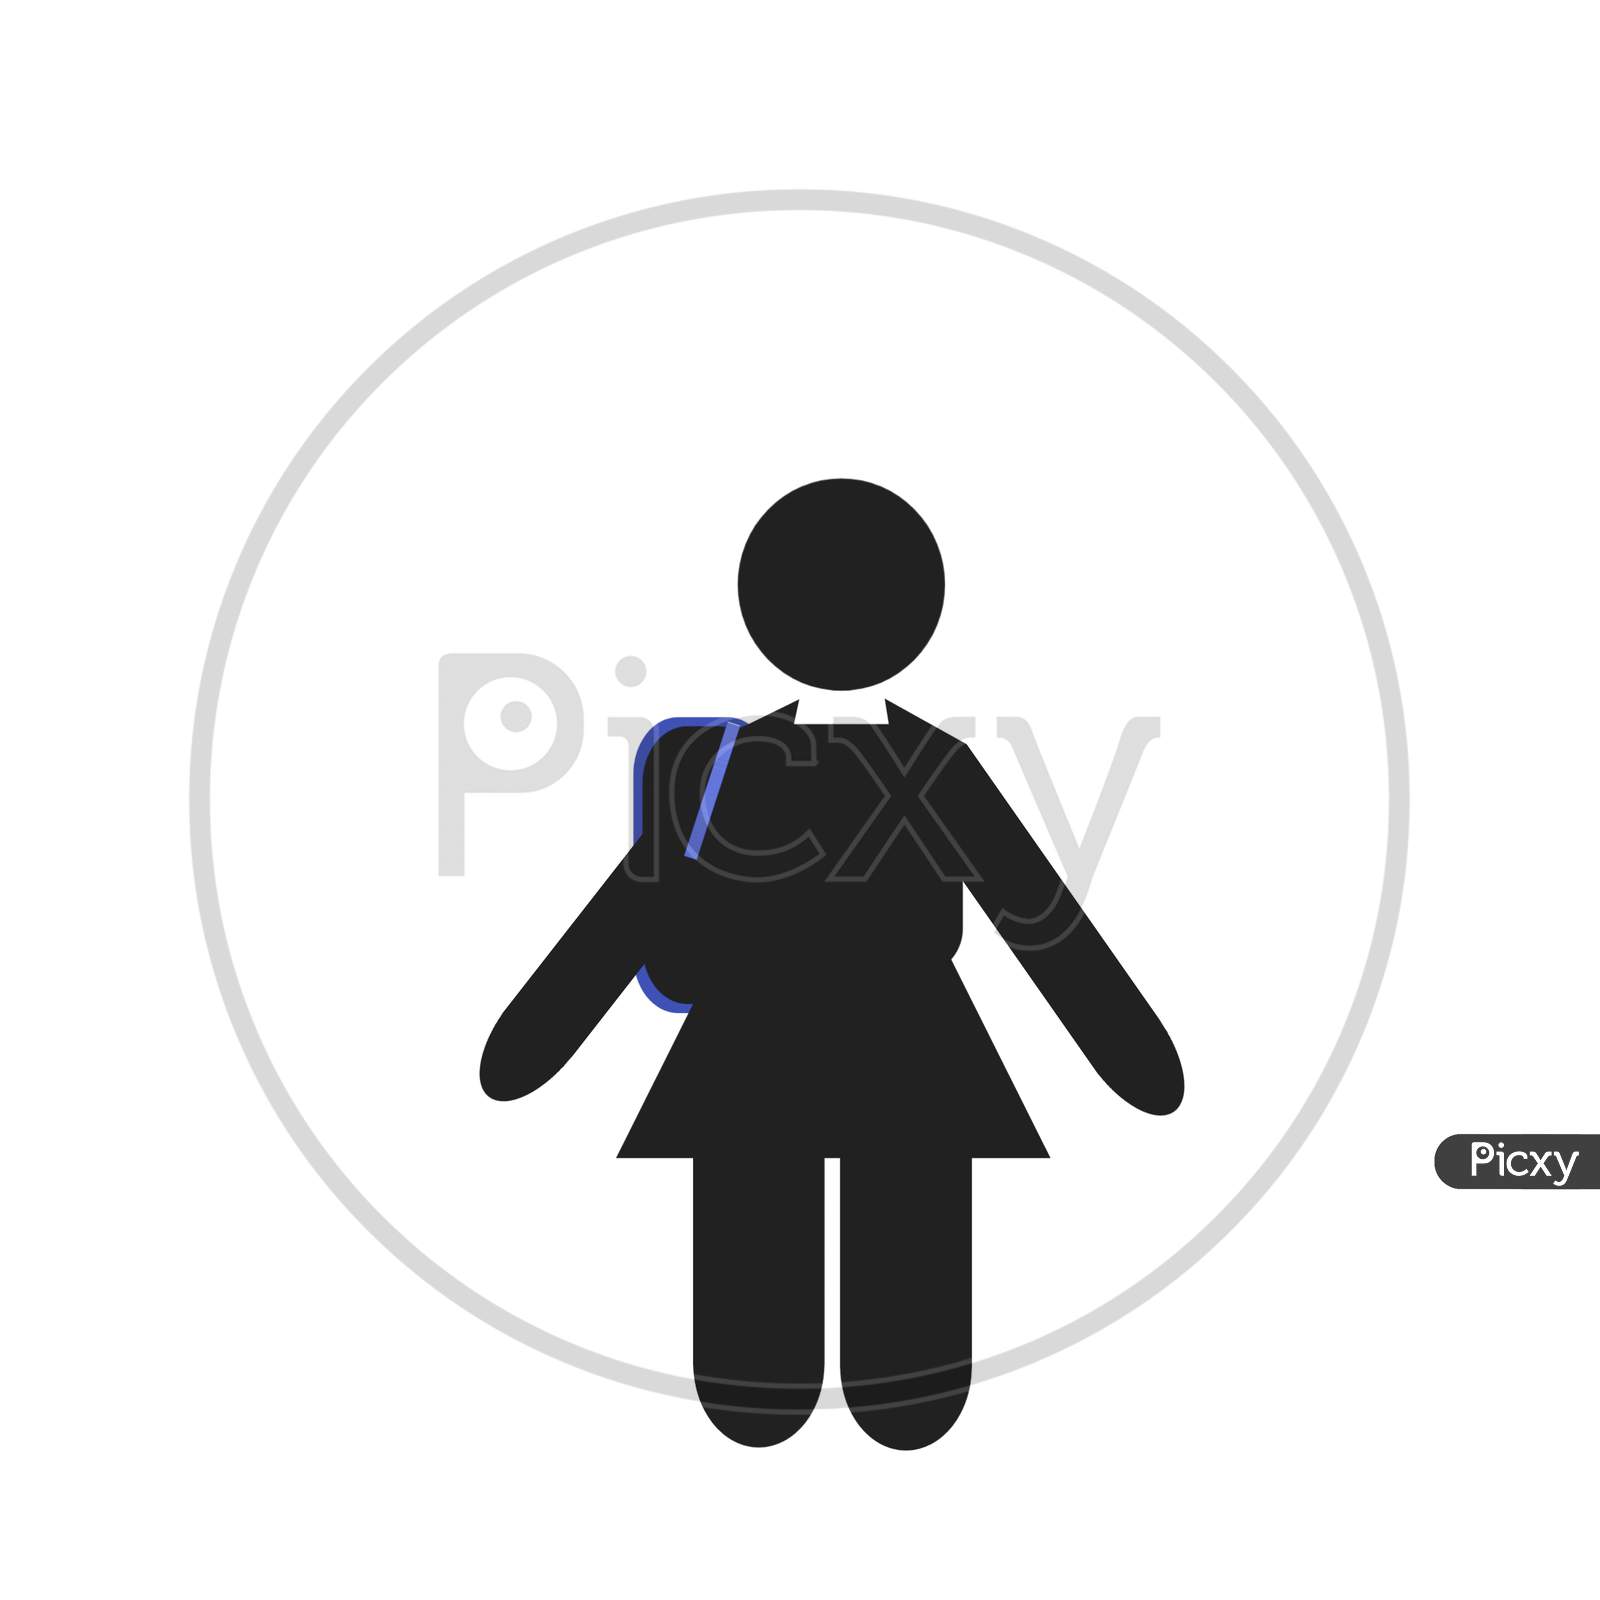 Small girl or kid school going icon in black with white background